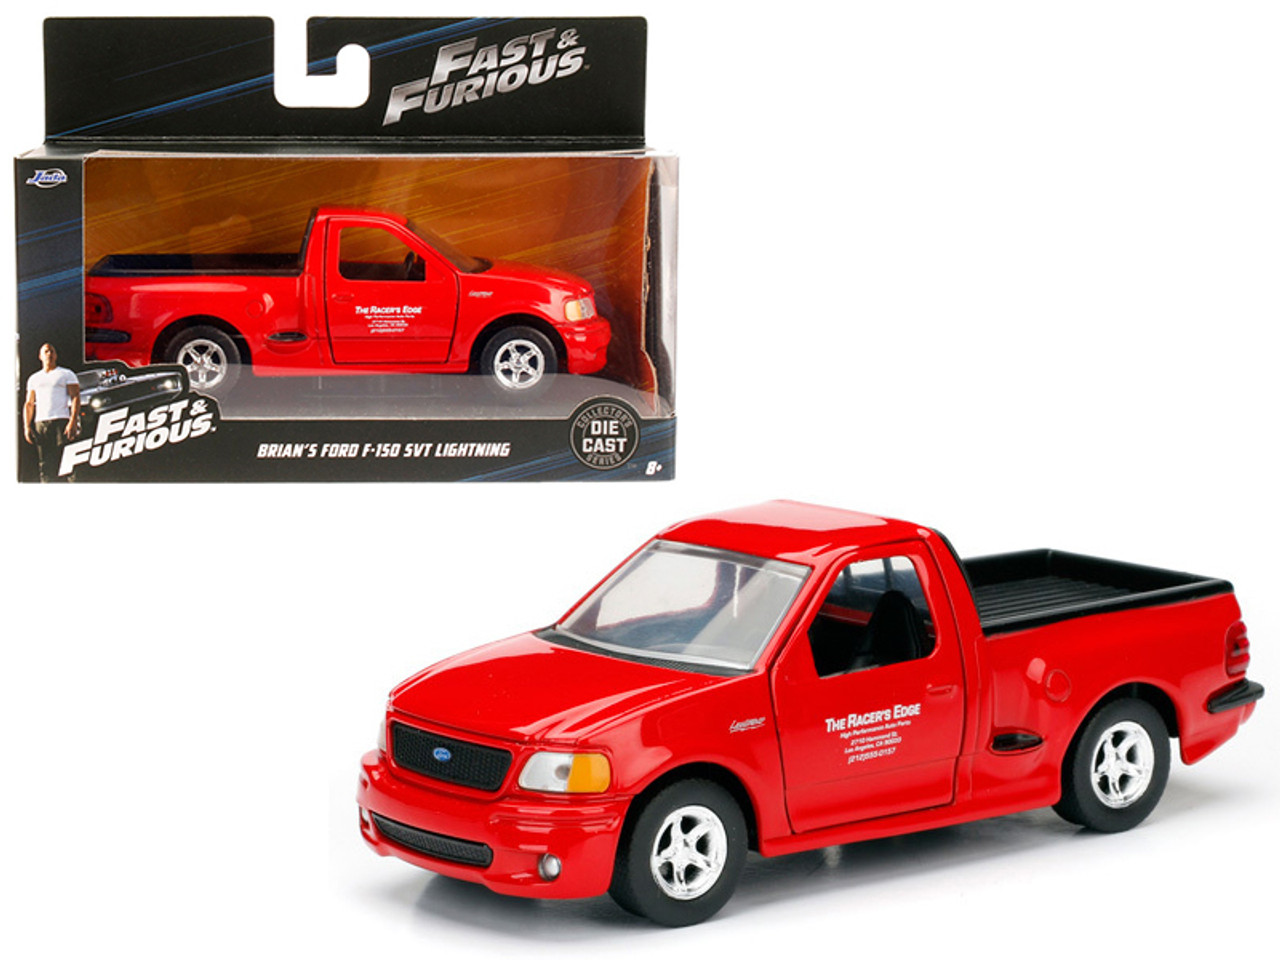 Brian's 1999 Ford F-150 SVT Lightning Pickup Truck Red "Fast & Furious" Movie 1/32 Diecast Model Car by Jada